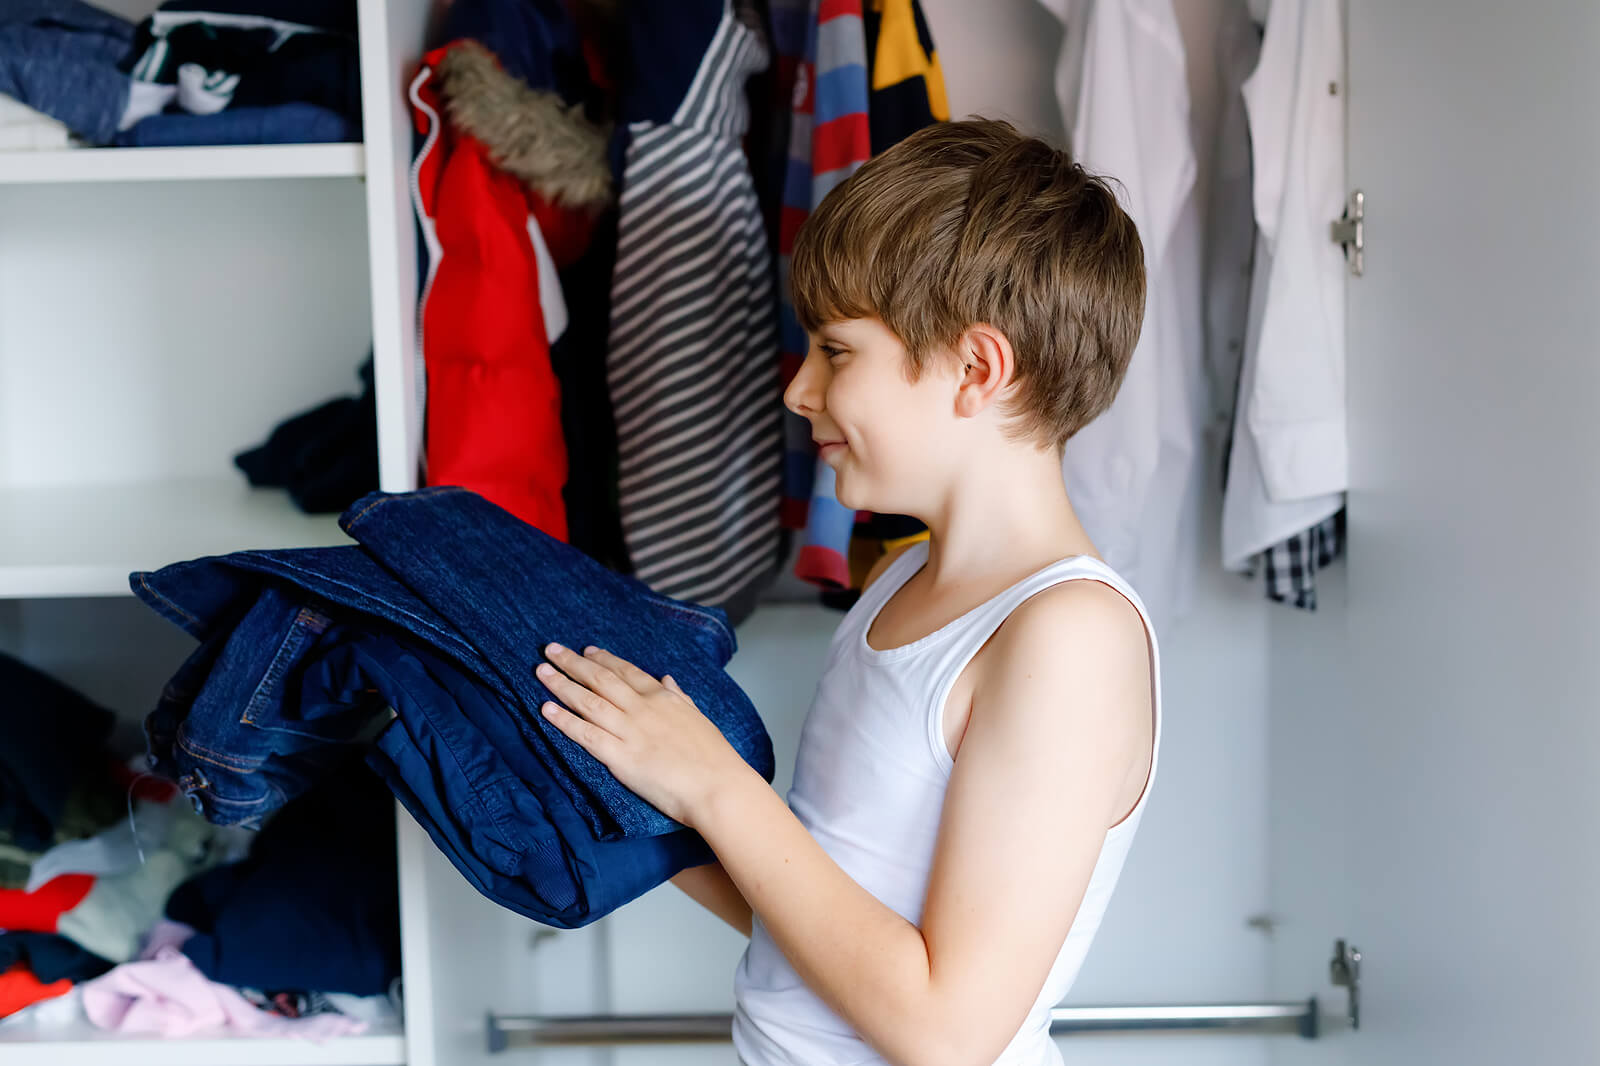 A boy folding jeans to put in his closet.